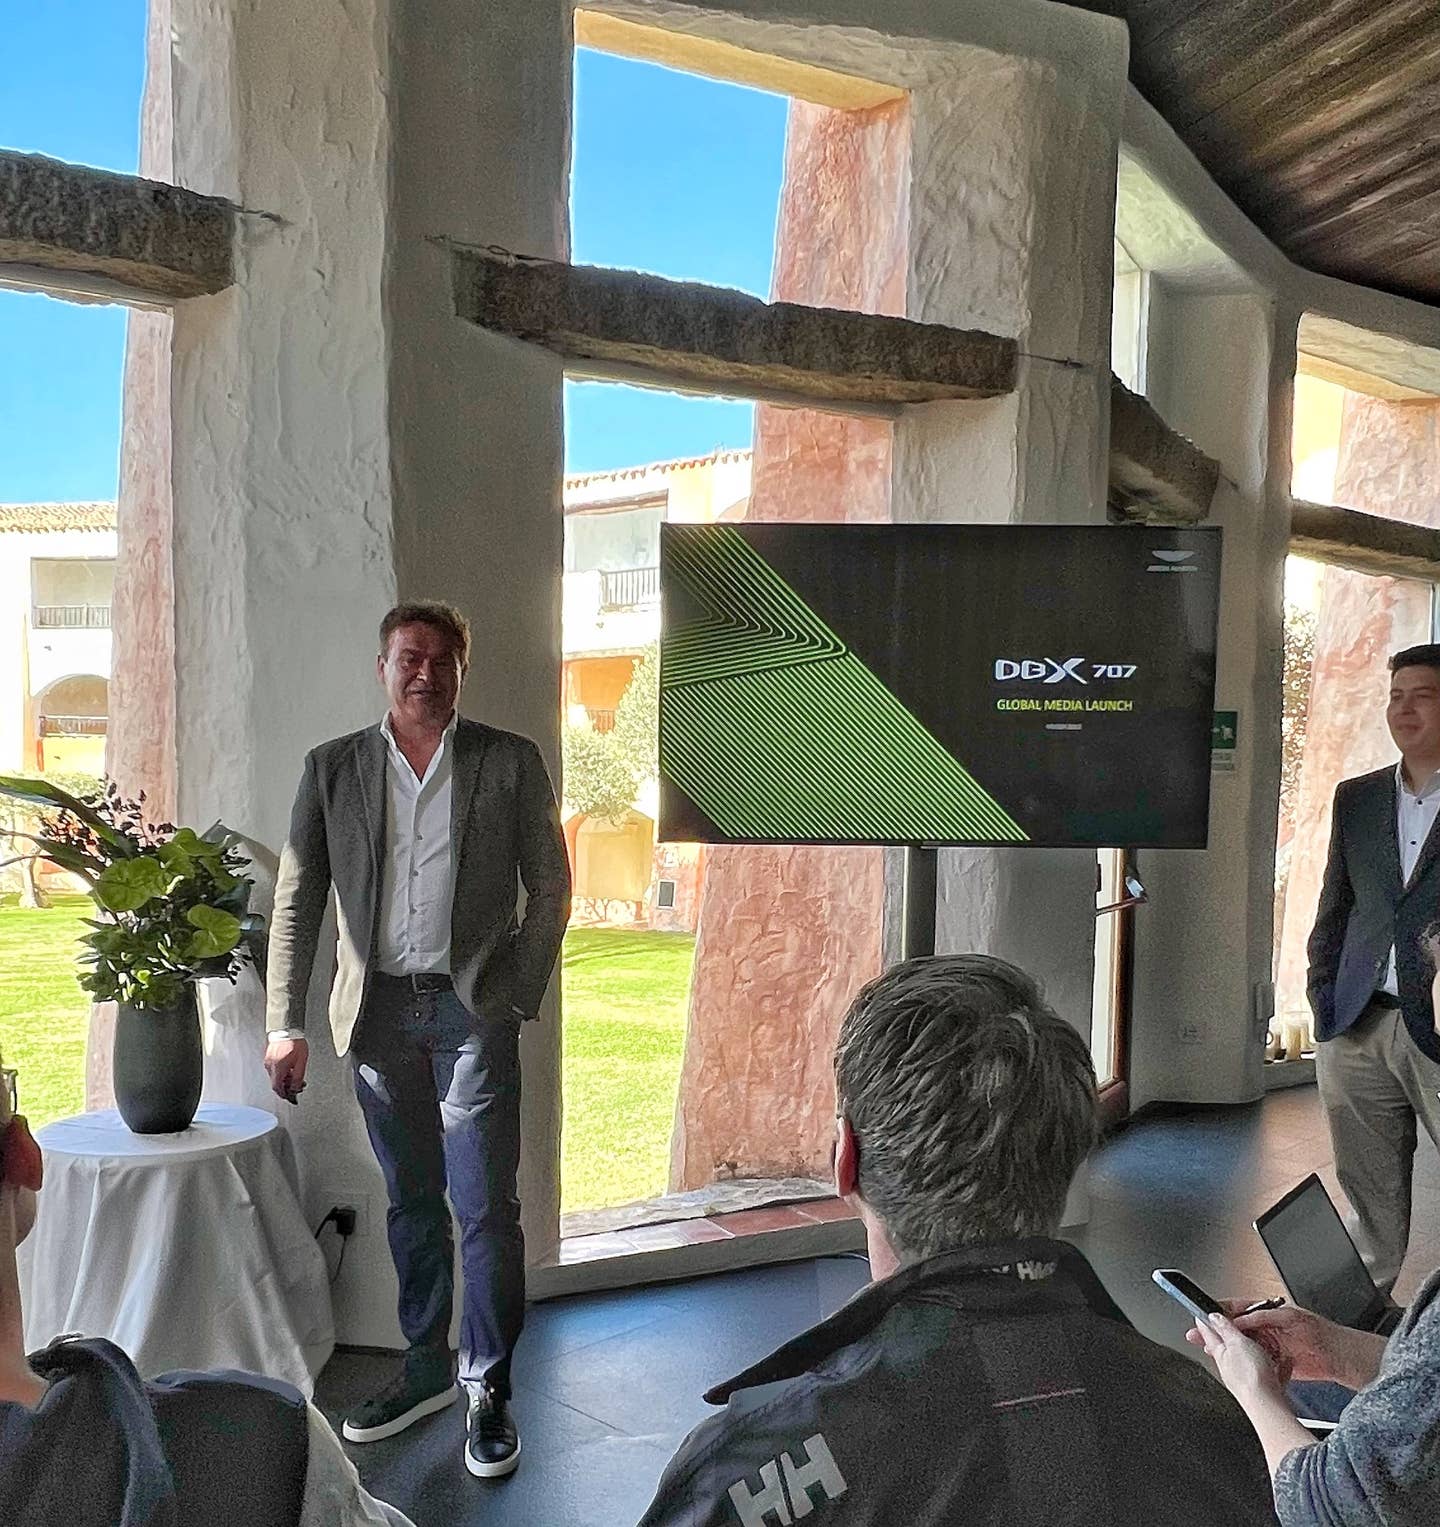 Tobias Moers introducing the Aston Martin DBX 707 in Sardinia, Italy in March 2022.